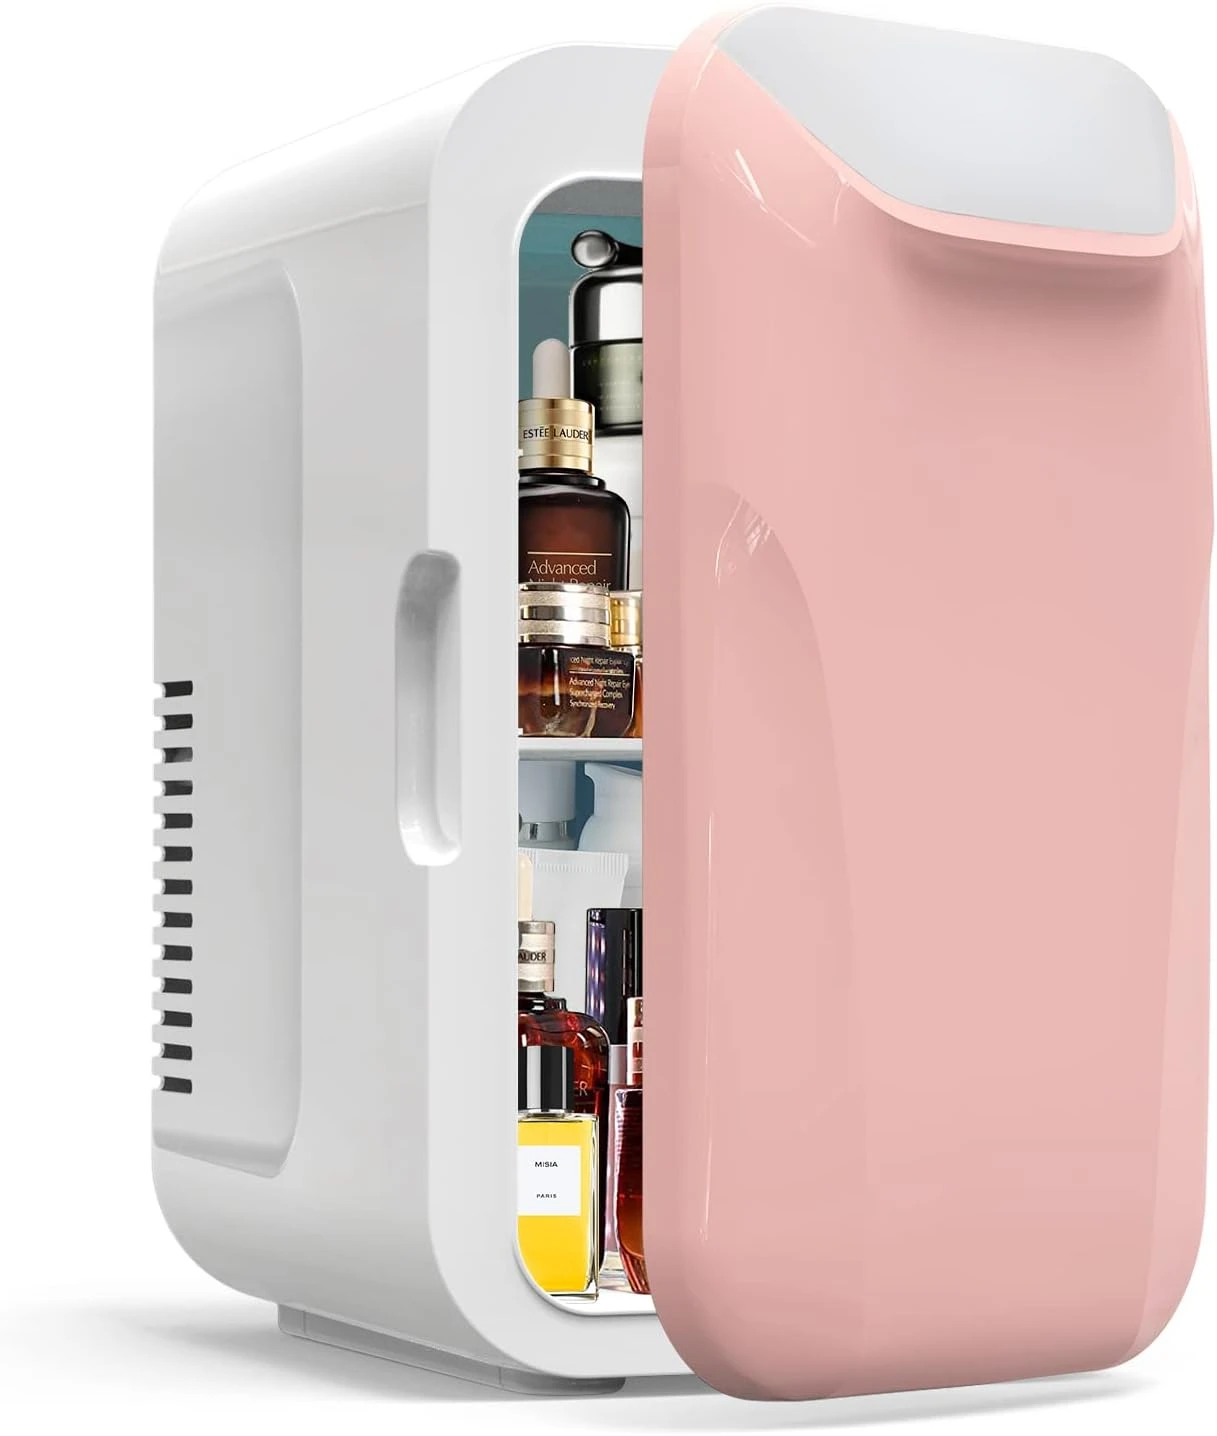 

Fridge,6 Liter/8 Can AC/DC Small Refrigerator,Portable Thermometric Cooler and Warmer Freezer Skincare fridge for Foods,Beverage